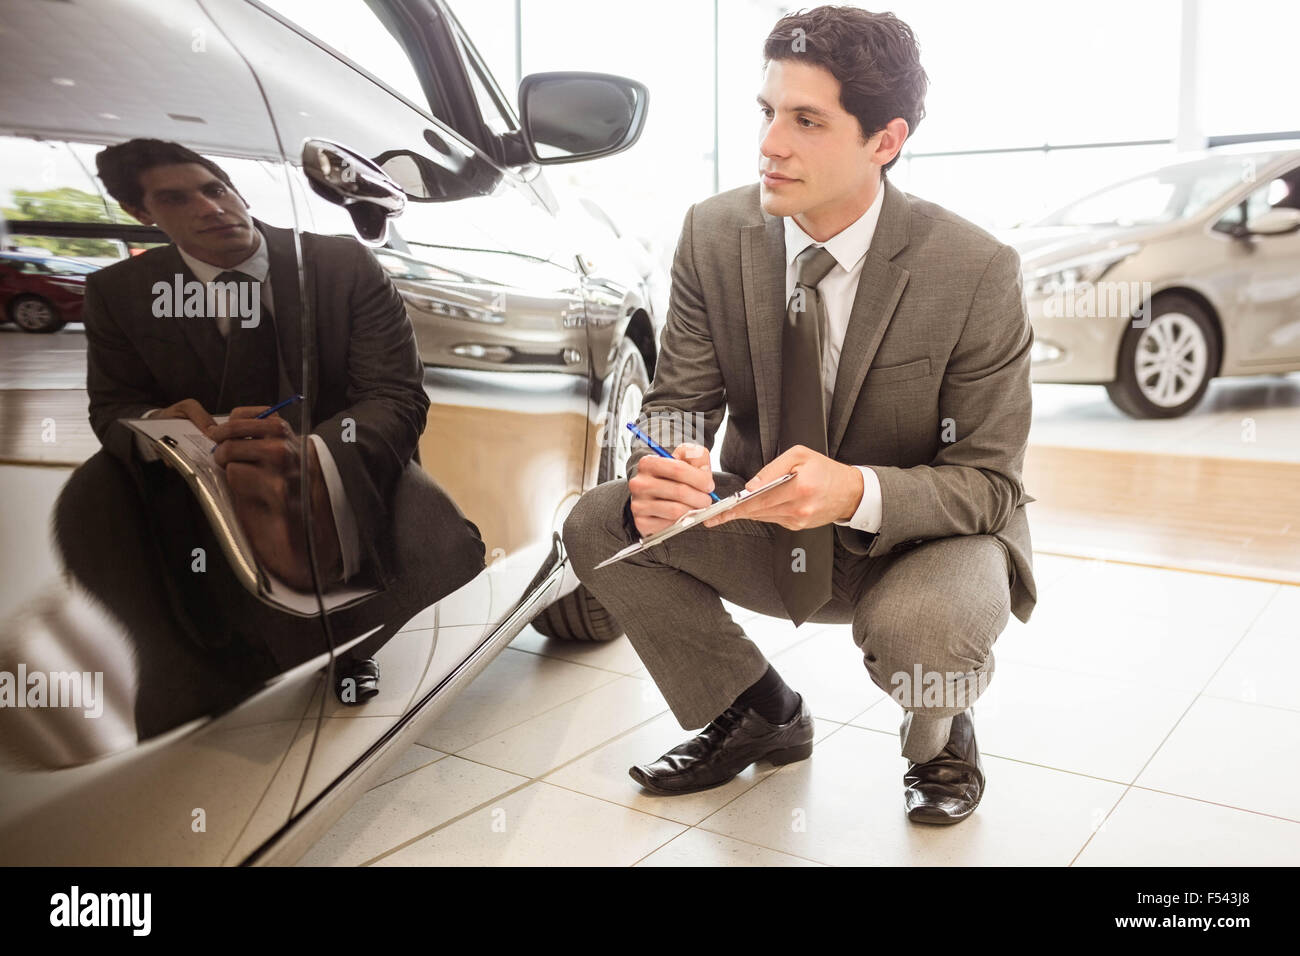 Focused businessman looking at the car body Stock Photo